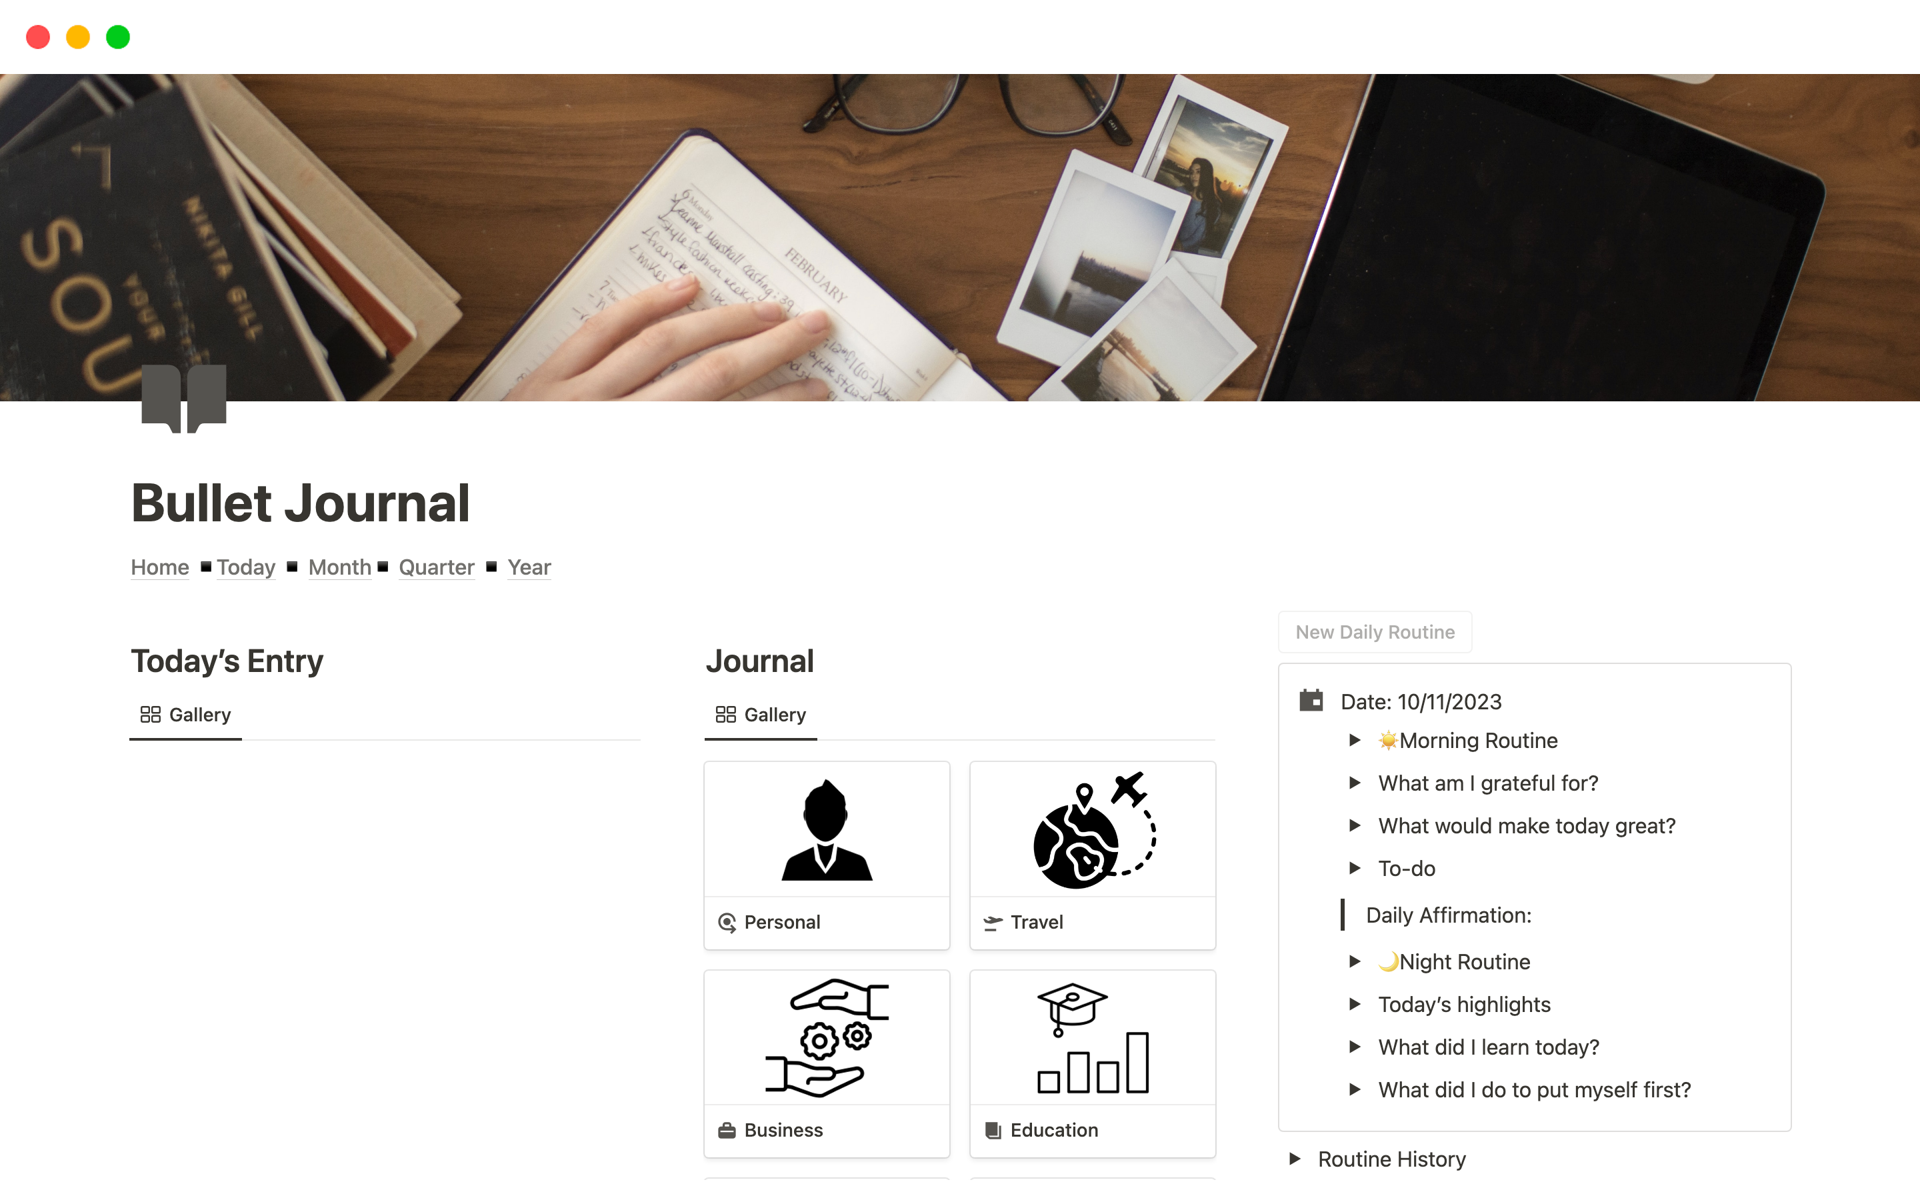 Unlock Your Potential with the Ultimate Bullet Journal Notion Template
Harness the Power of Organization, Elevate Your Productivity, and Achieve Your Goals with the Complete Bullet Journal Notion Template.